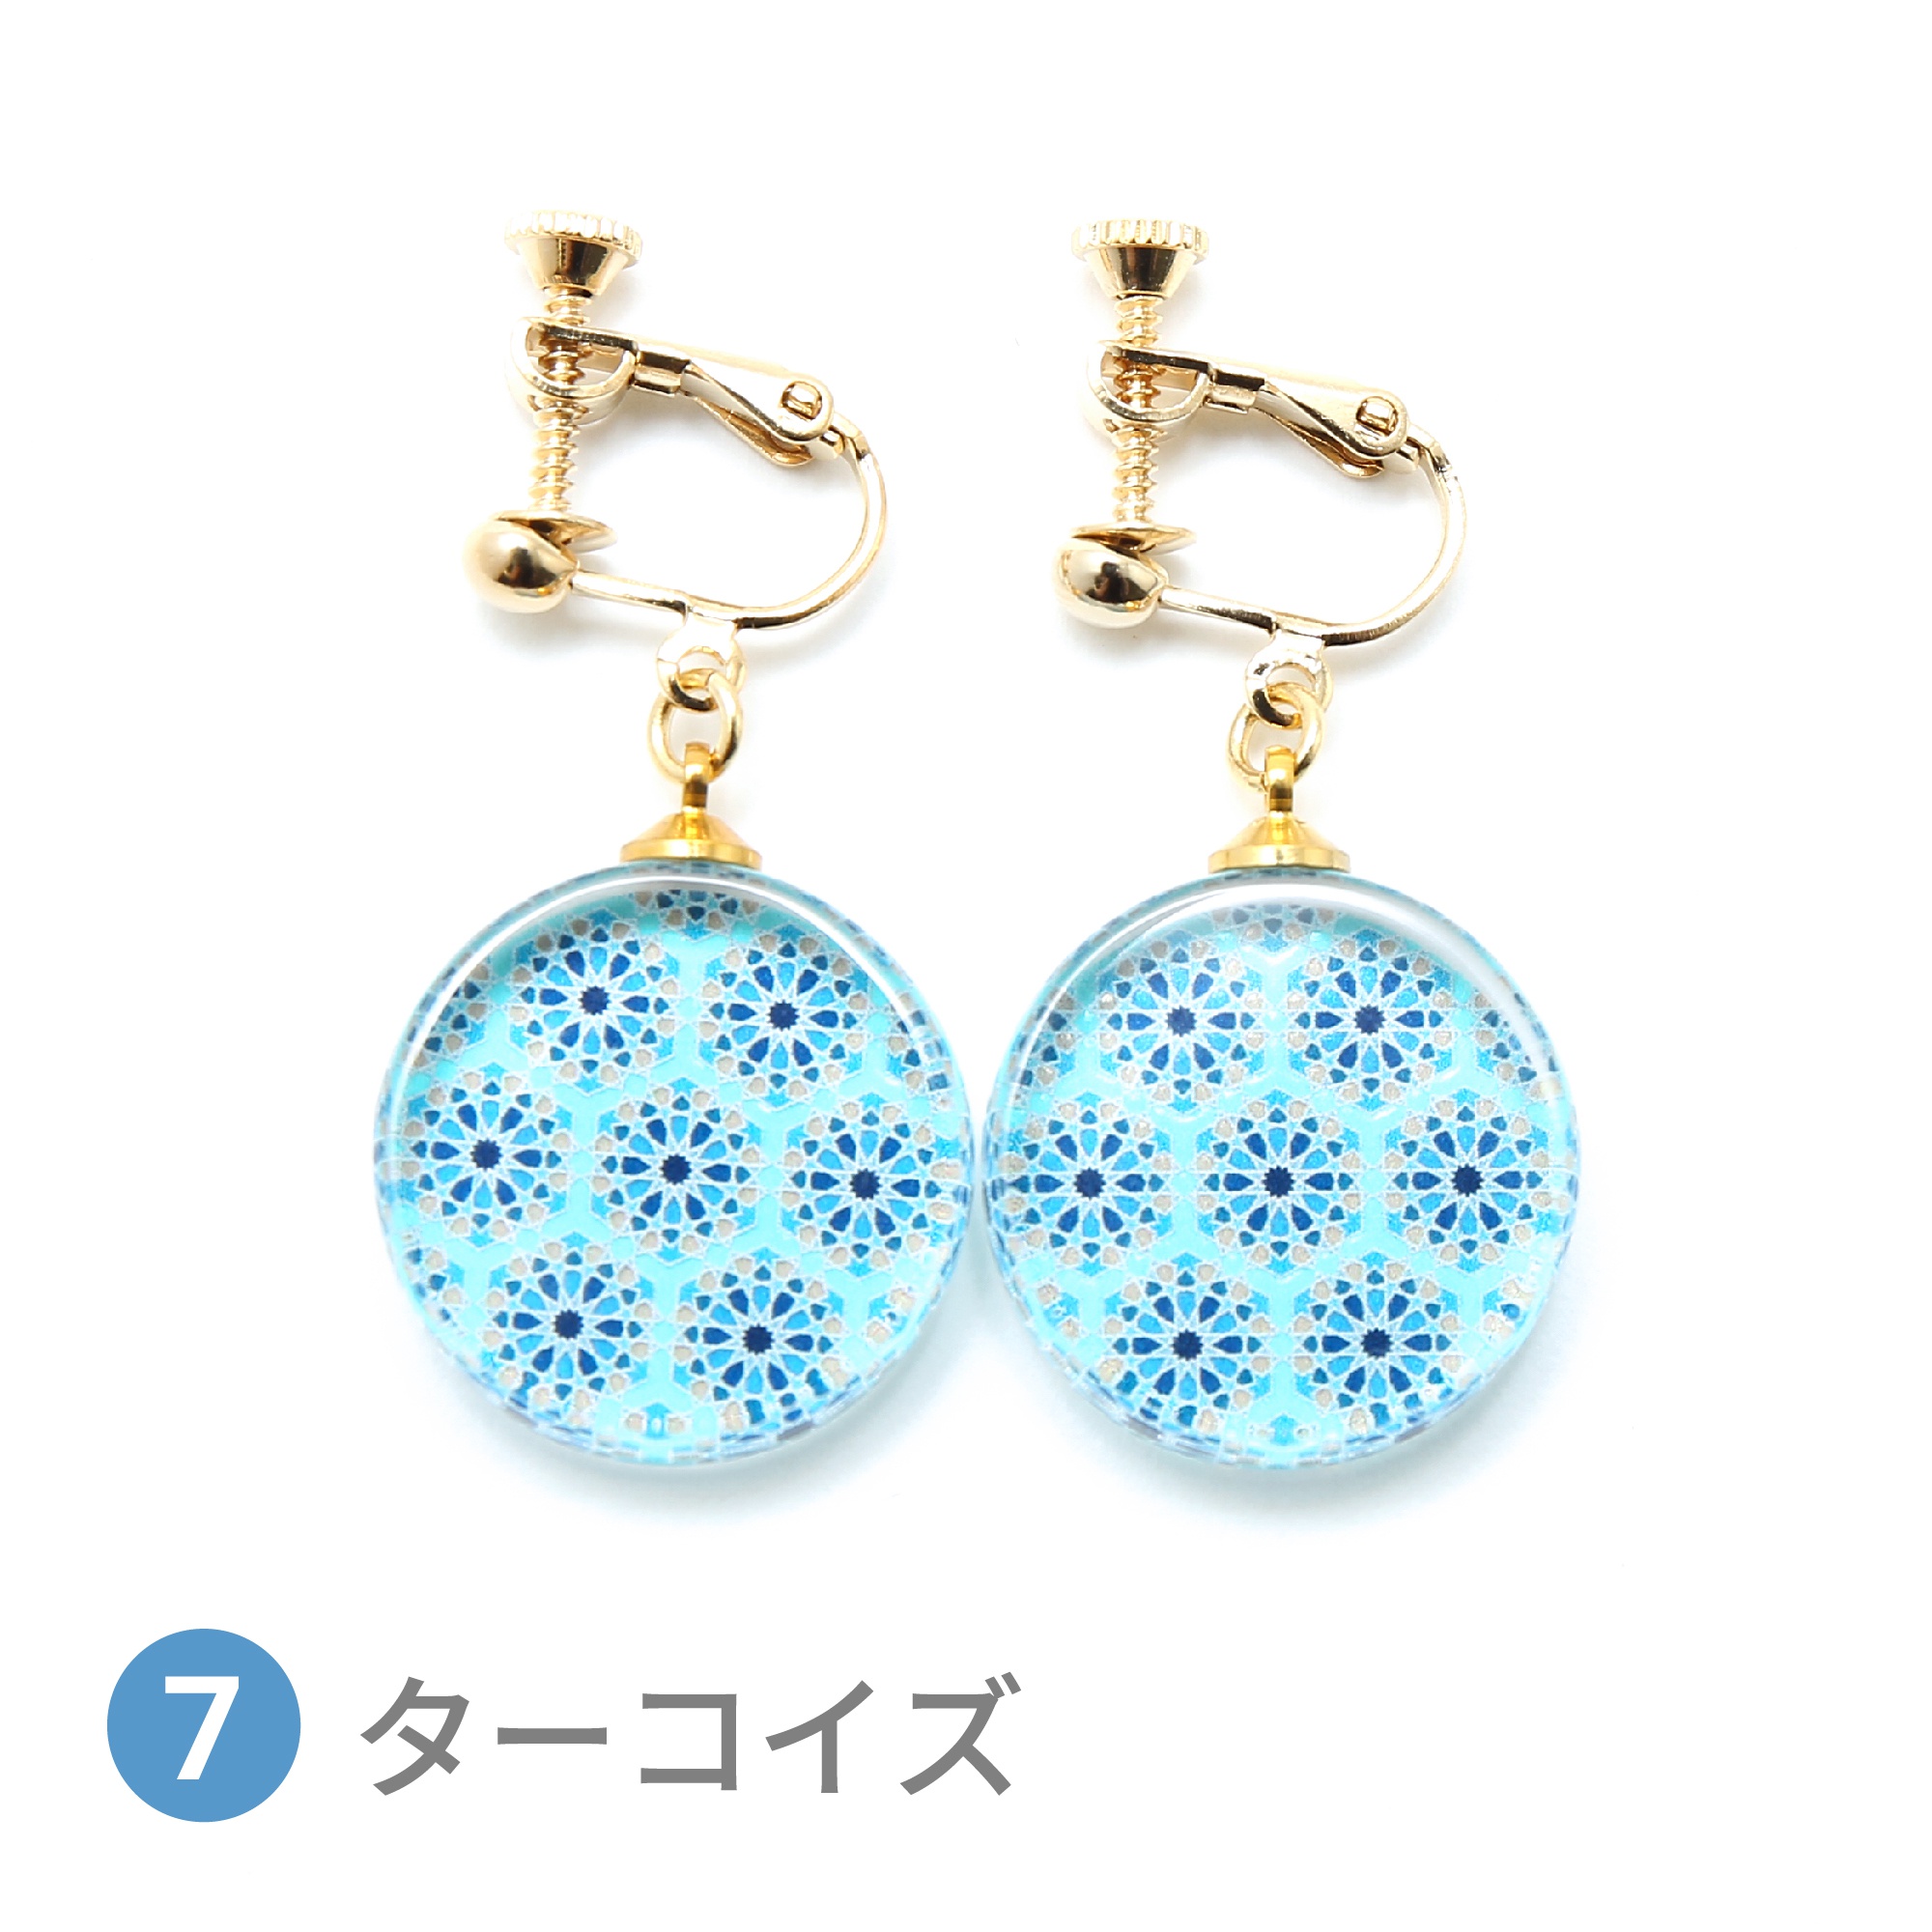 Glass accessories Earring ARABESQUE turquoise round shape